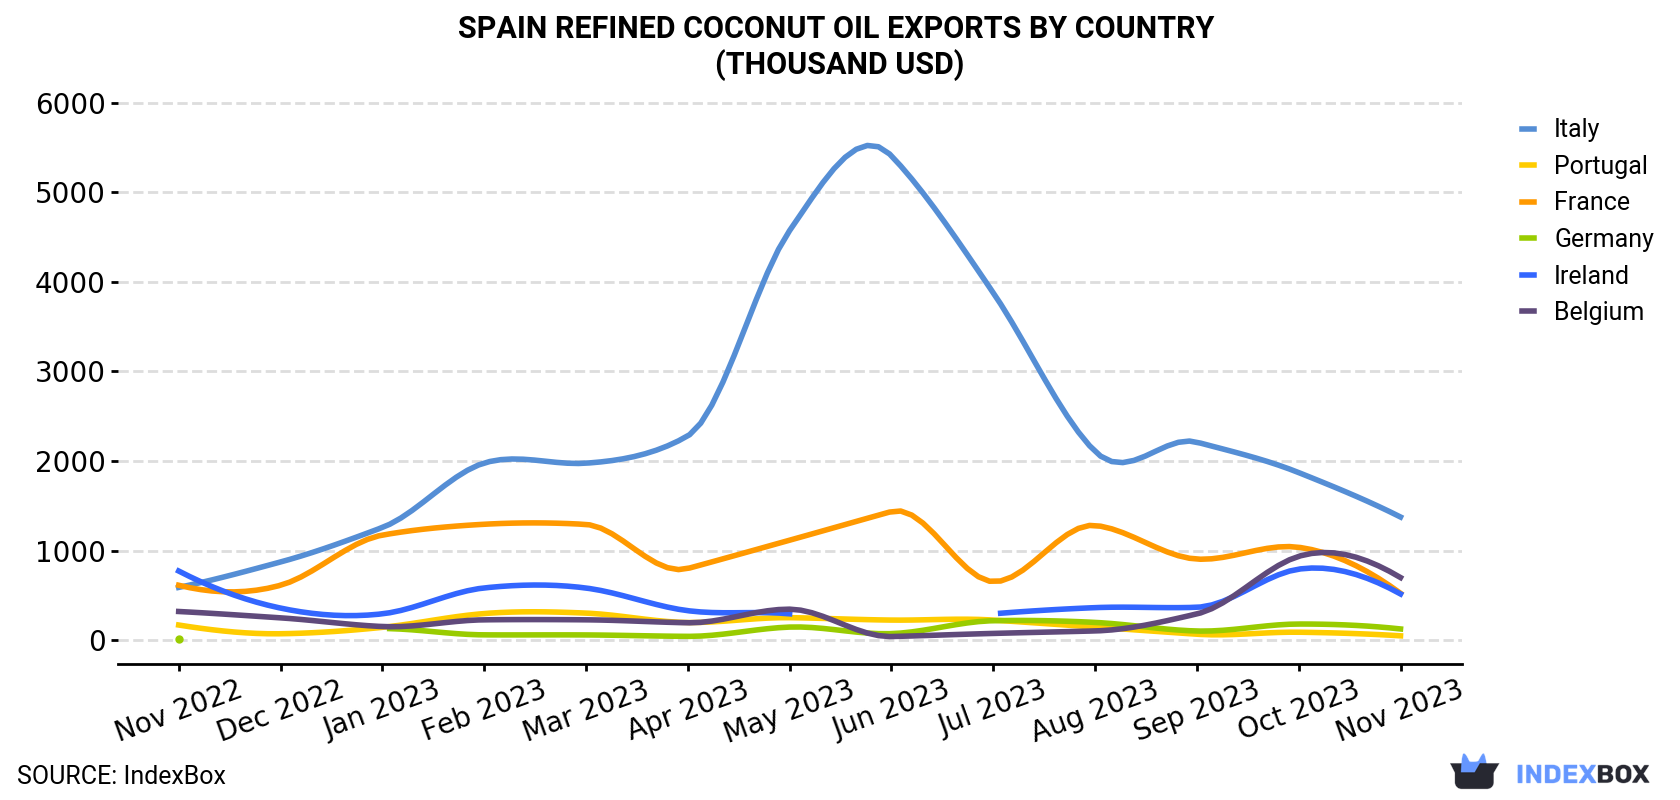 Spain Refined Coconut Oil Exports By Country (Thousand USD)